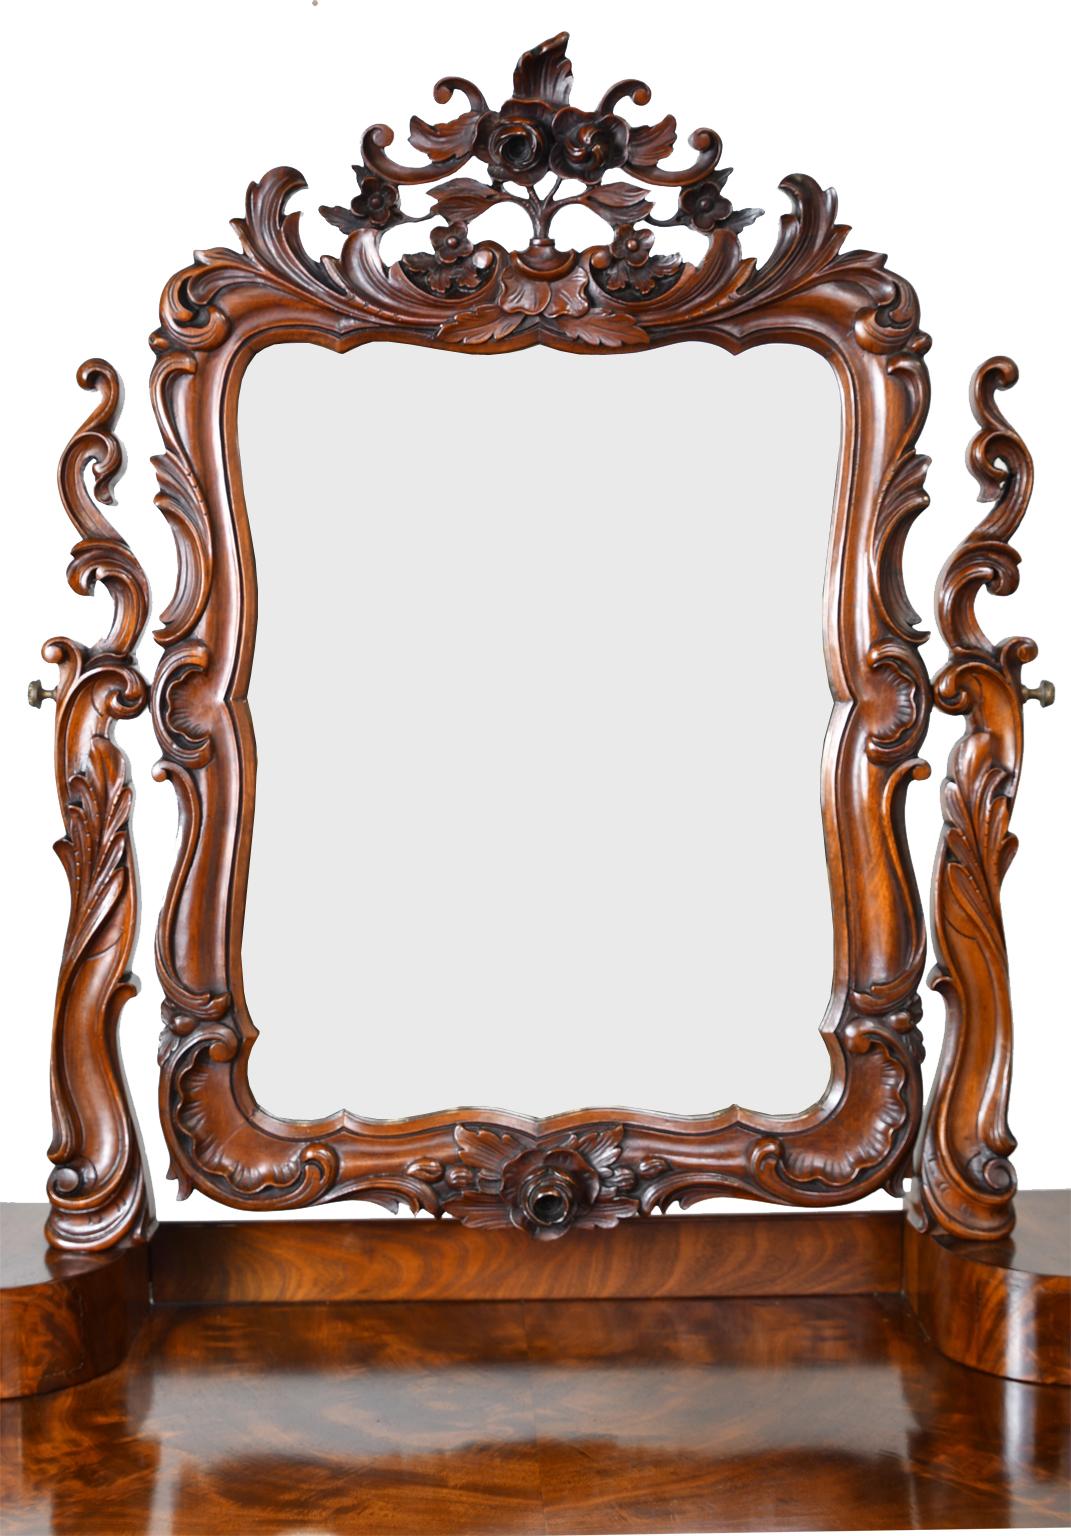 Antique Karl Johan Dressing Table/Vanity & Mirror in Mahogany w/ Rococo Carvings For Sale 1